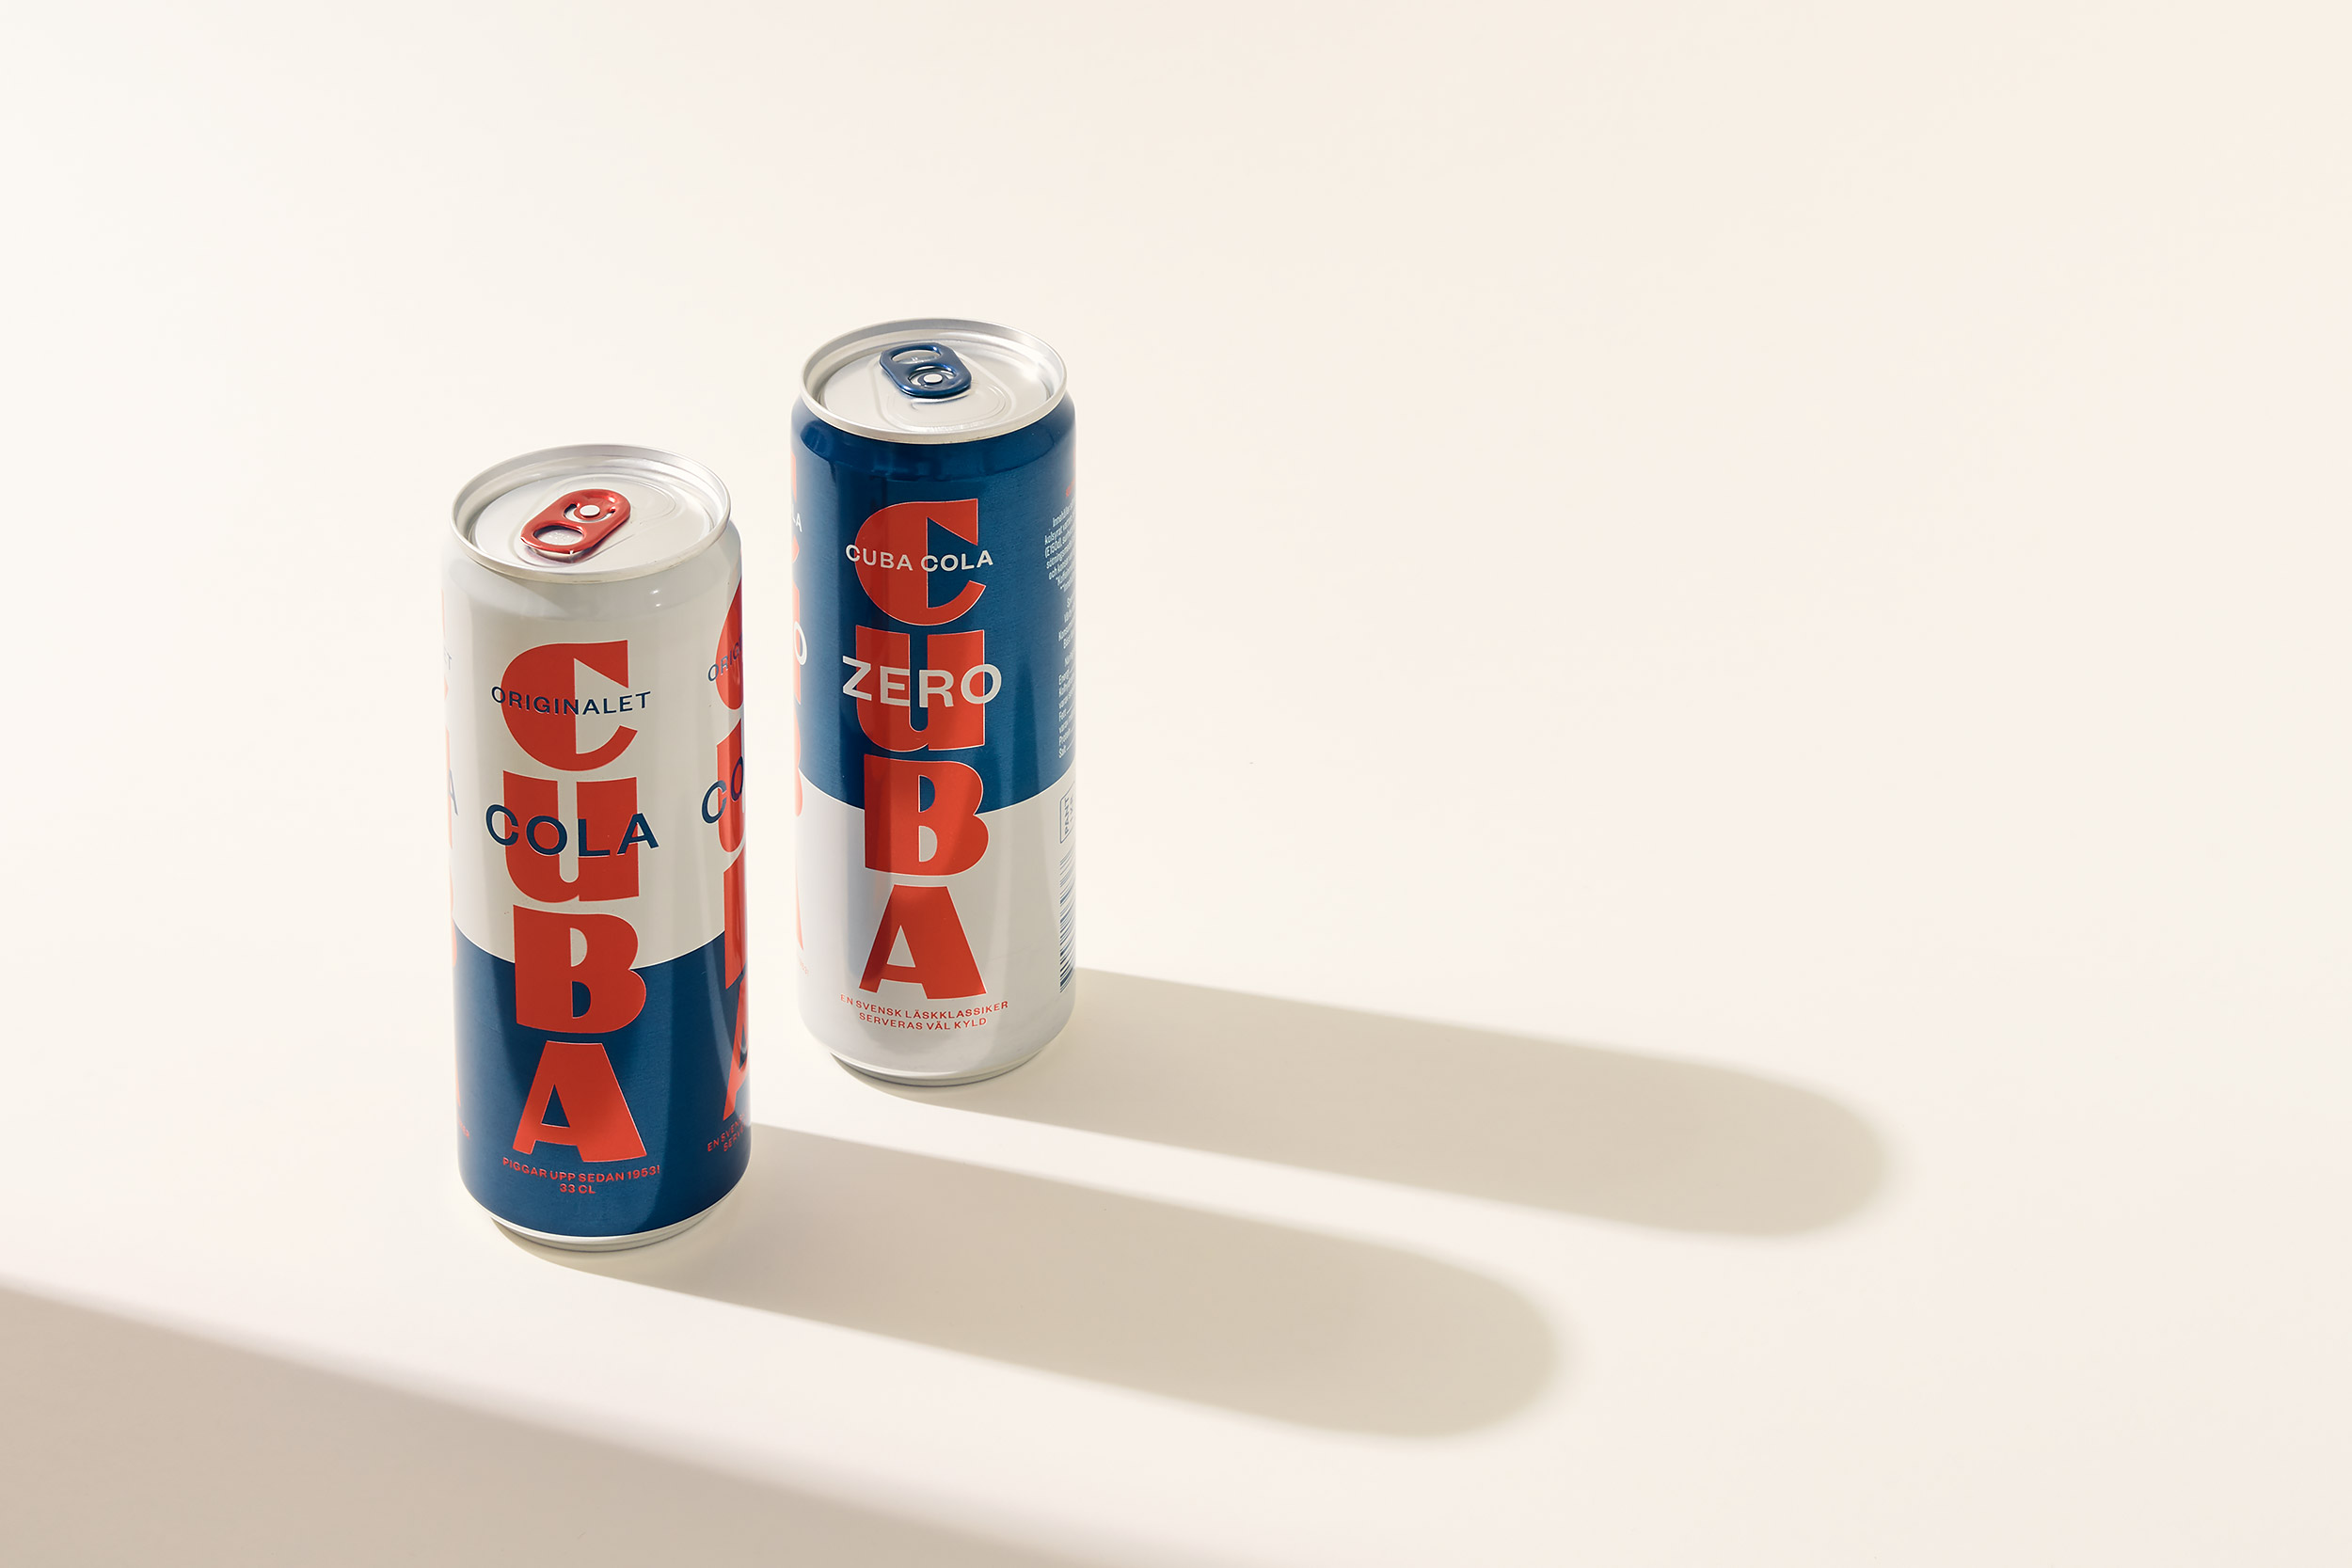 Neumeister packaging design Cuba Cola original and zero cans